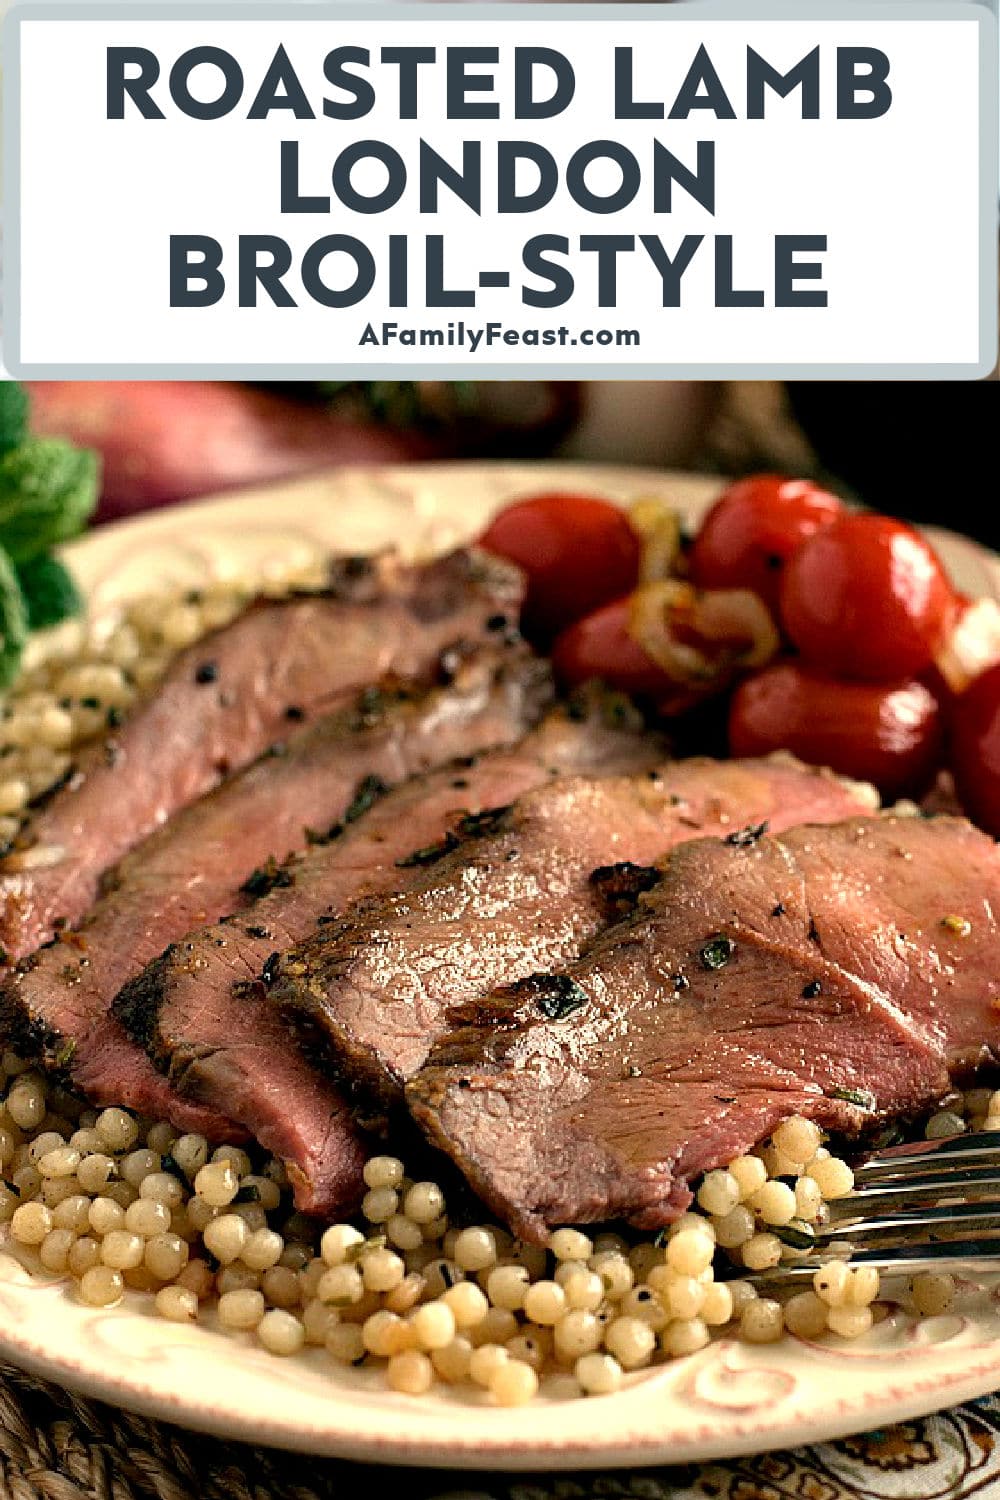 Roasted Lamb London Broil - A Family Feast